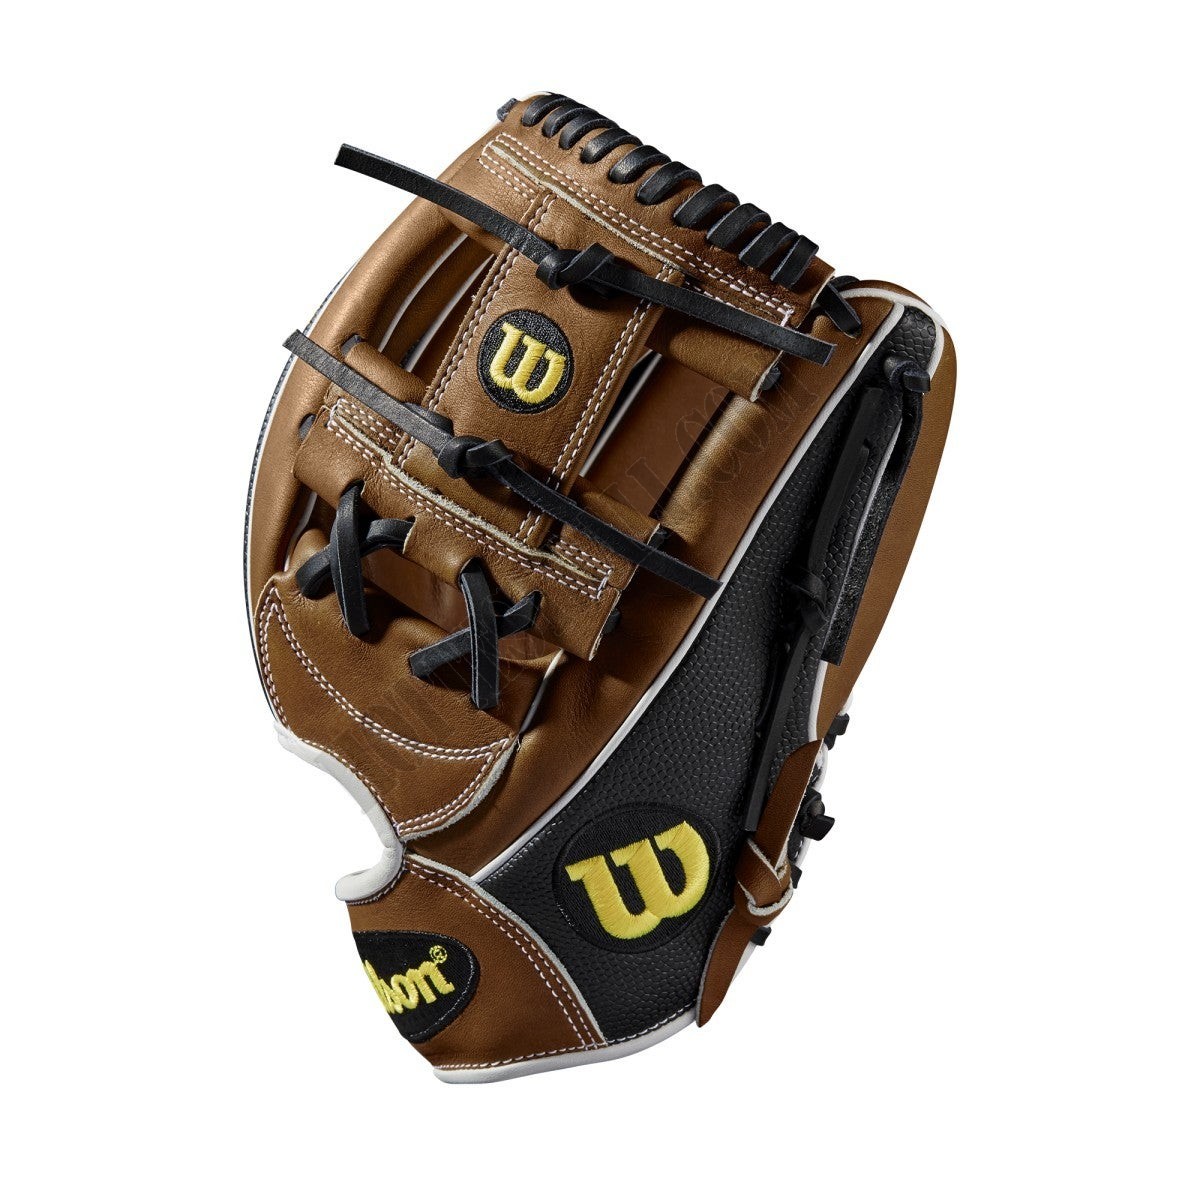 2019 A2000 1787 SuperSkin 11.75" Infield Baseball Glove - Right Hand Throw ● Wilson Promotions - -3